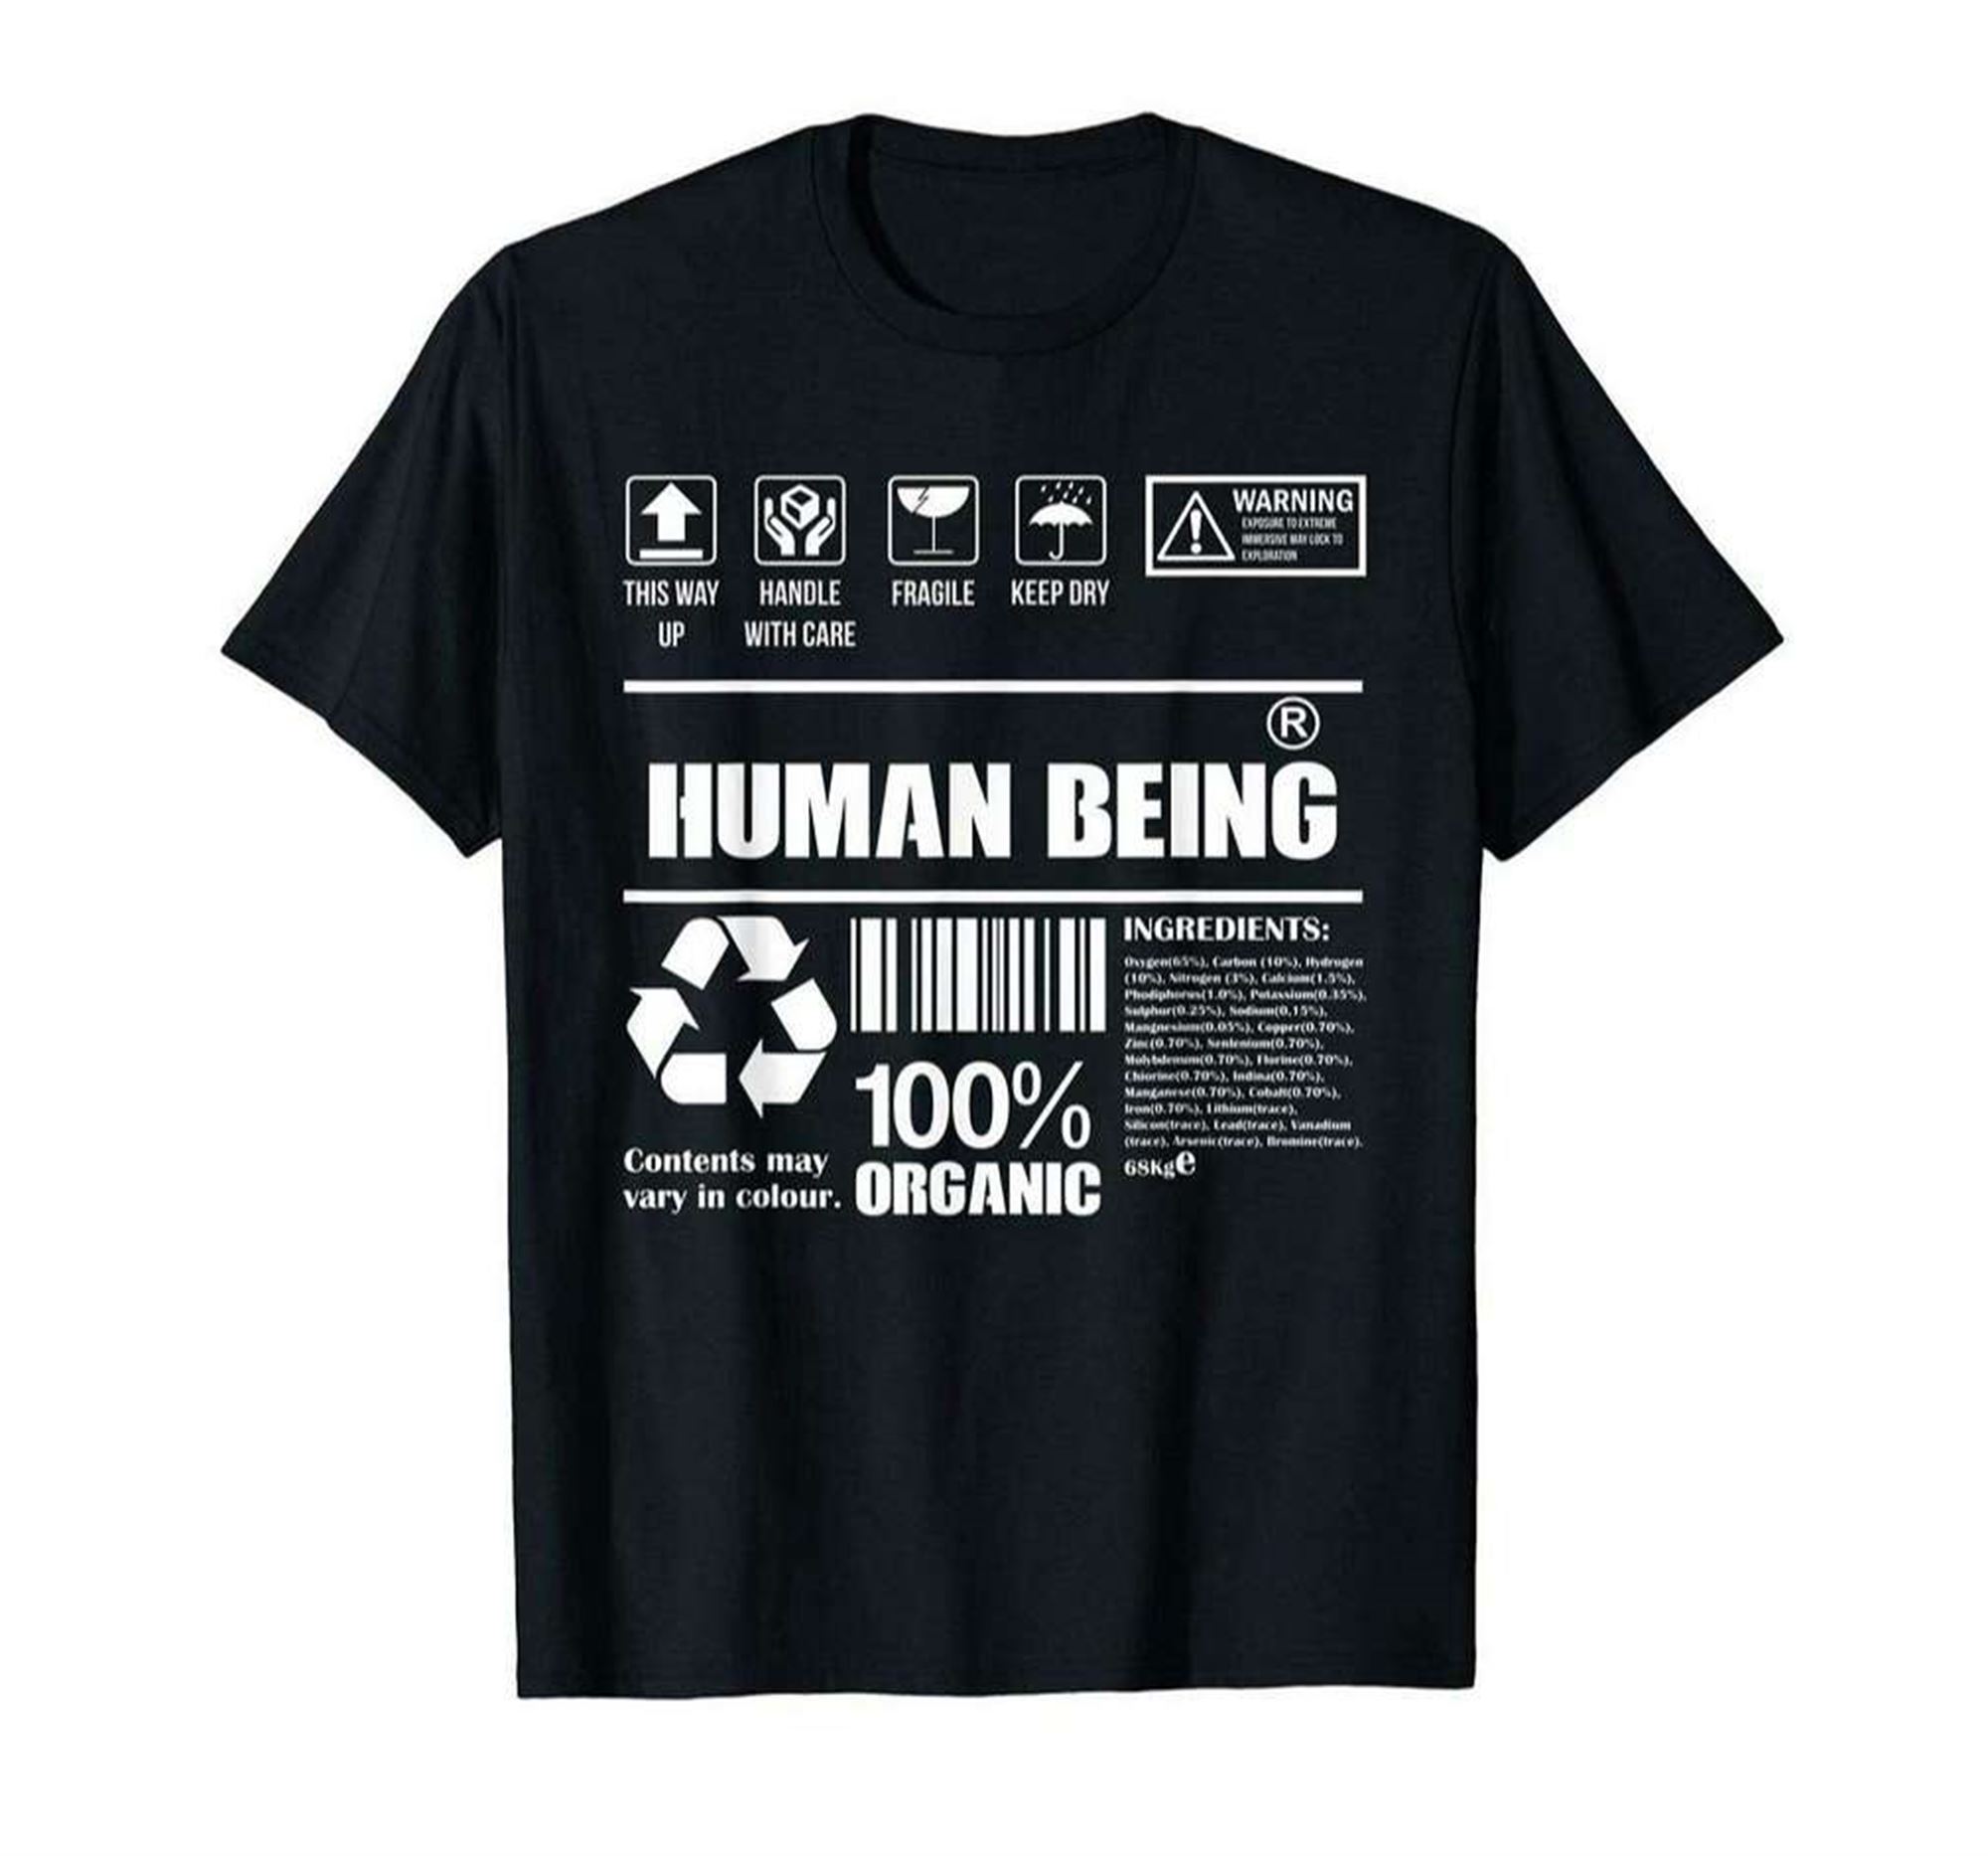 Human Being Science Ingredients 100 Organic T-shirt Size Up To 5xl